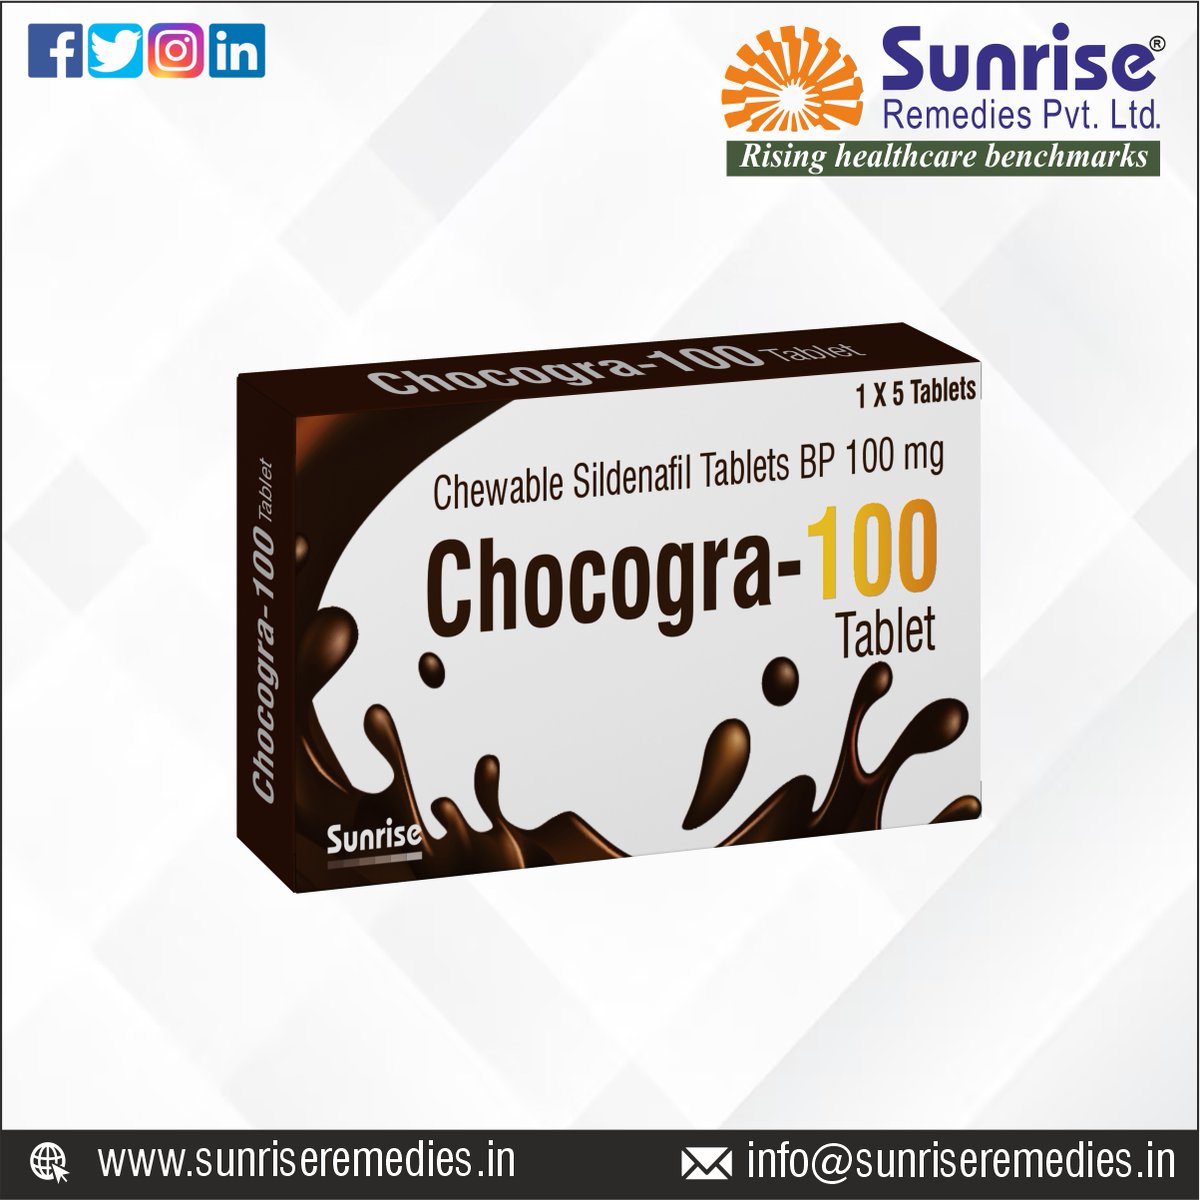 Make Your Love Marking Life Happier with #ChocograChewable Contains Sildenafil Chewable Most Popular Products From Sunrise Remedies Pvt. Ltd.

Read More: sunriseremedies.in/our-products/c…

#SildenafilChewable #TadalafilChewable #SildenafilEffervescent #TadalafilChewable #Medicineexporter